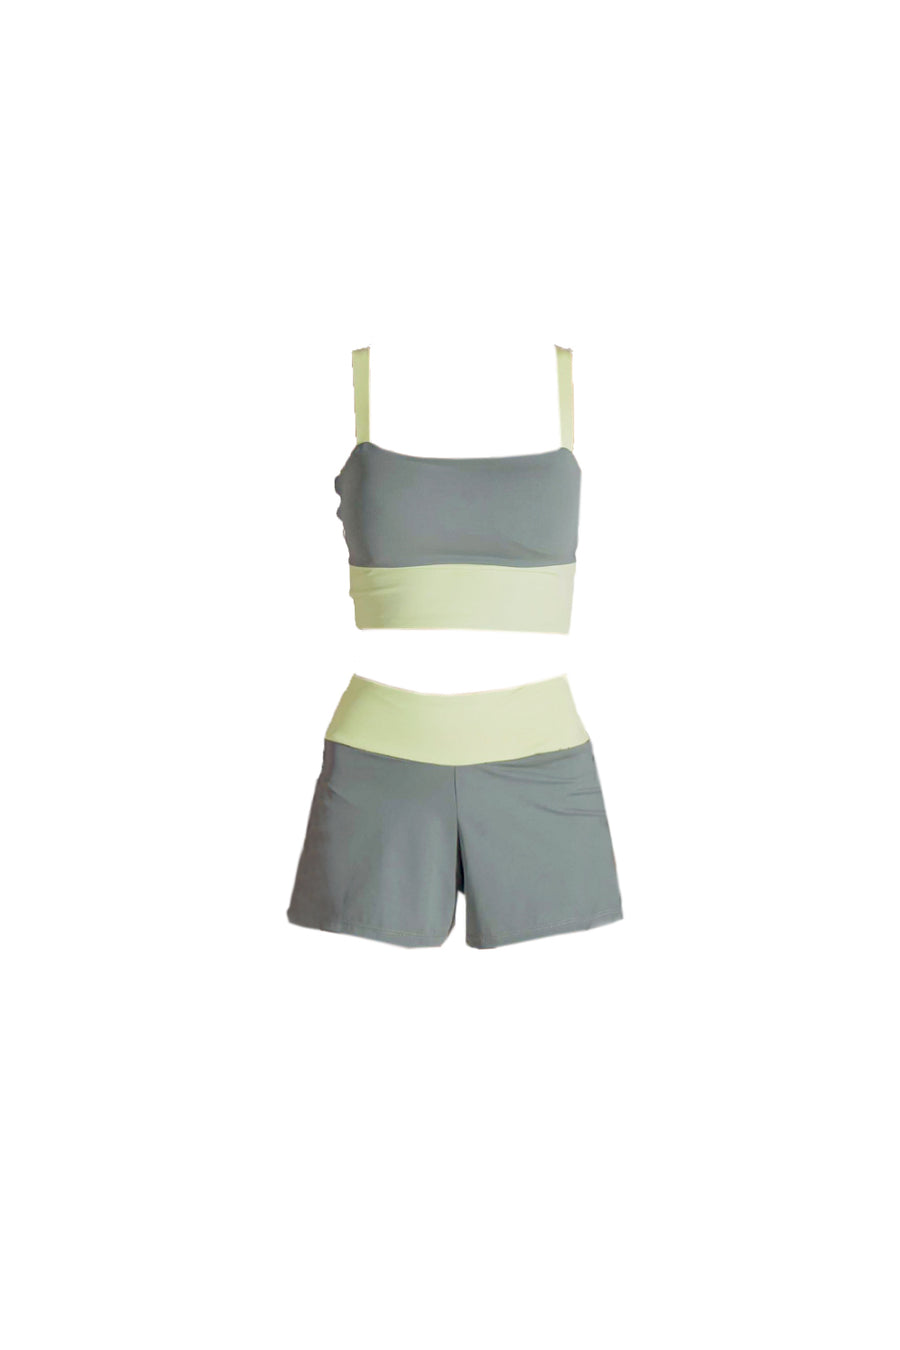 Marilyn Two Piece Ivy Green